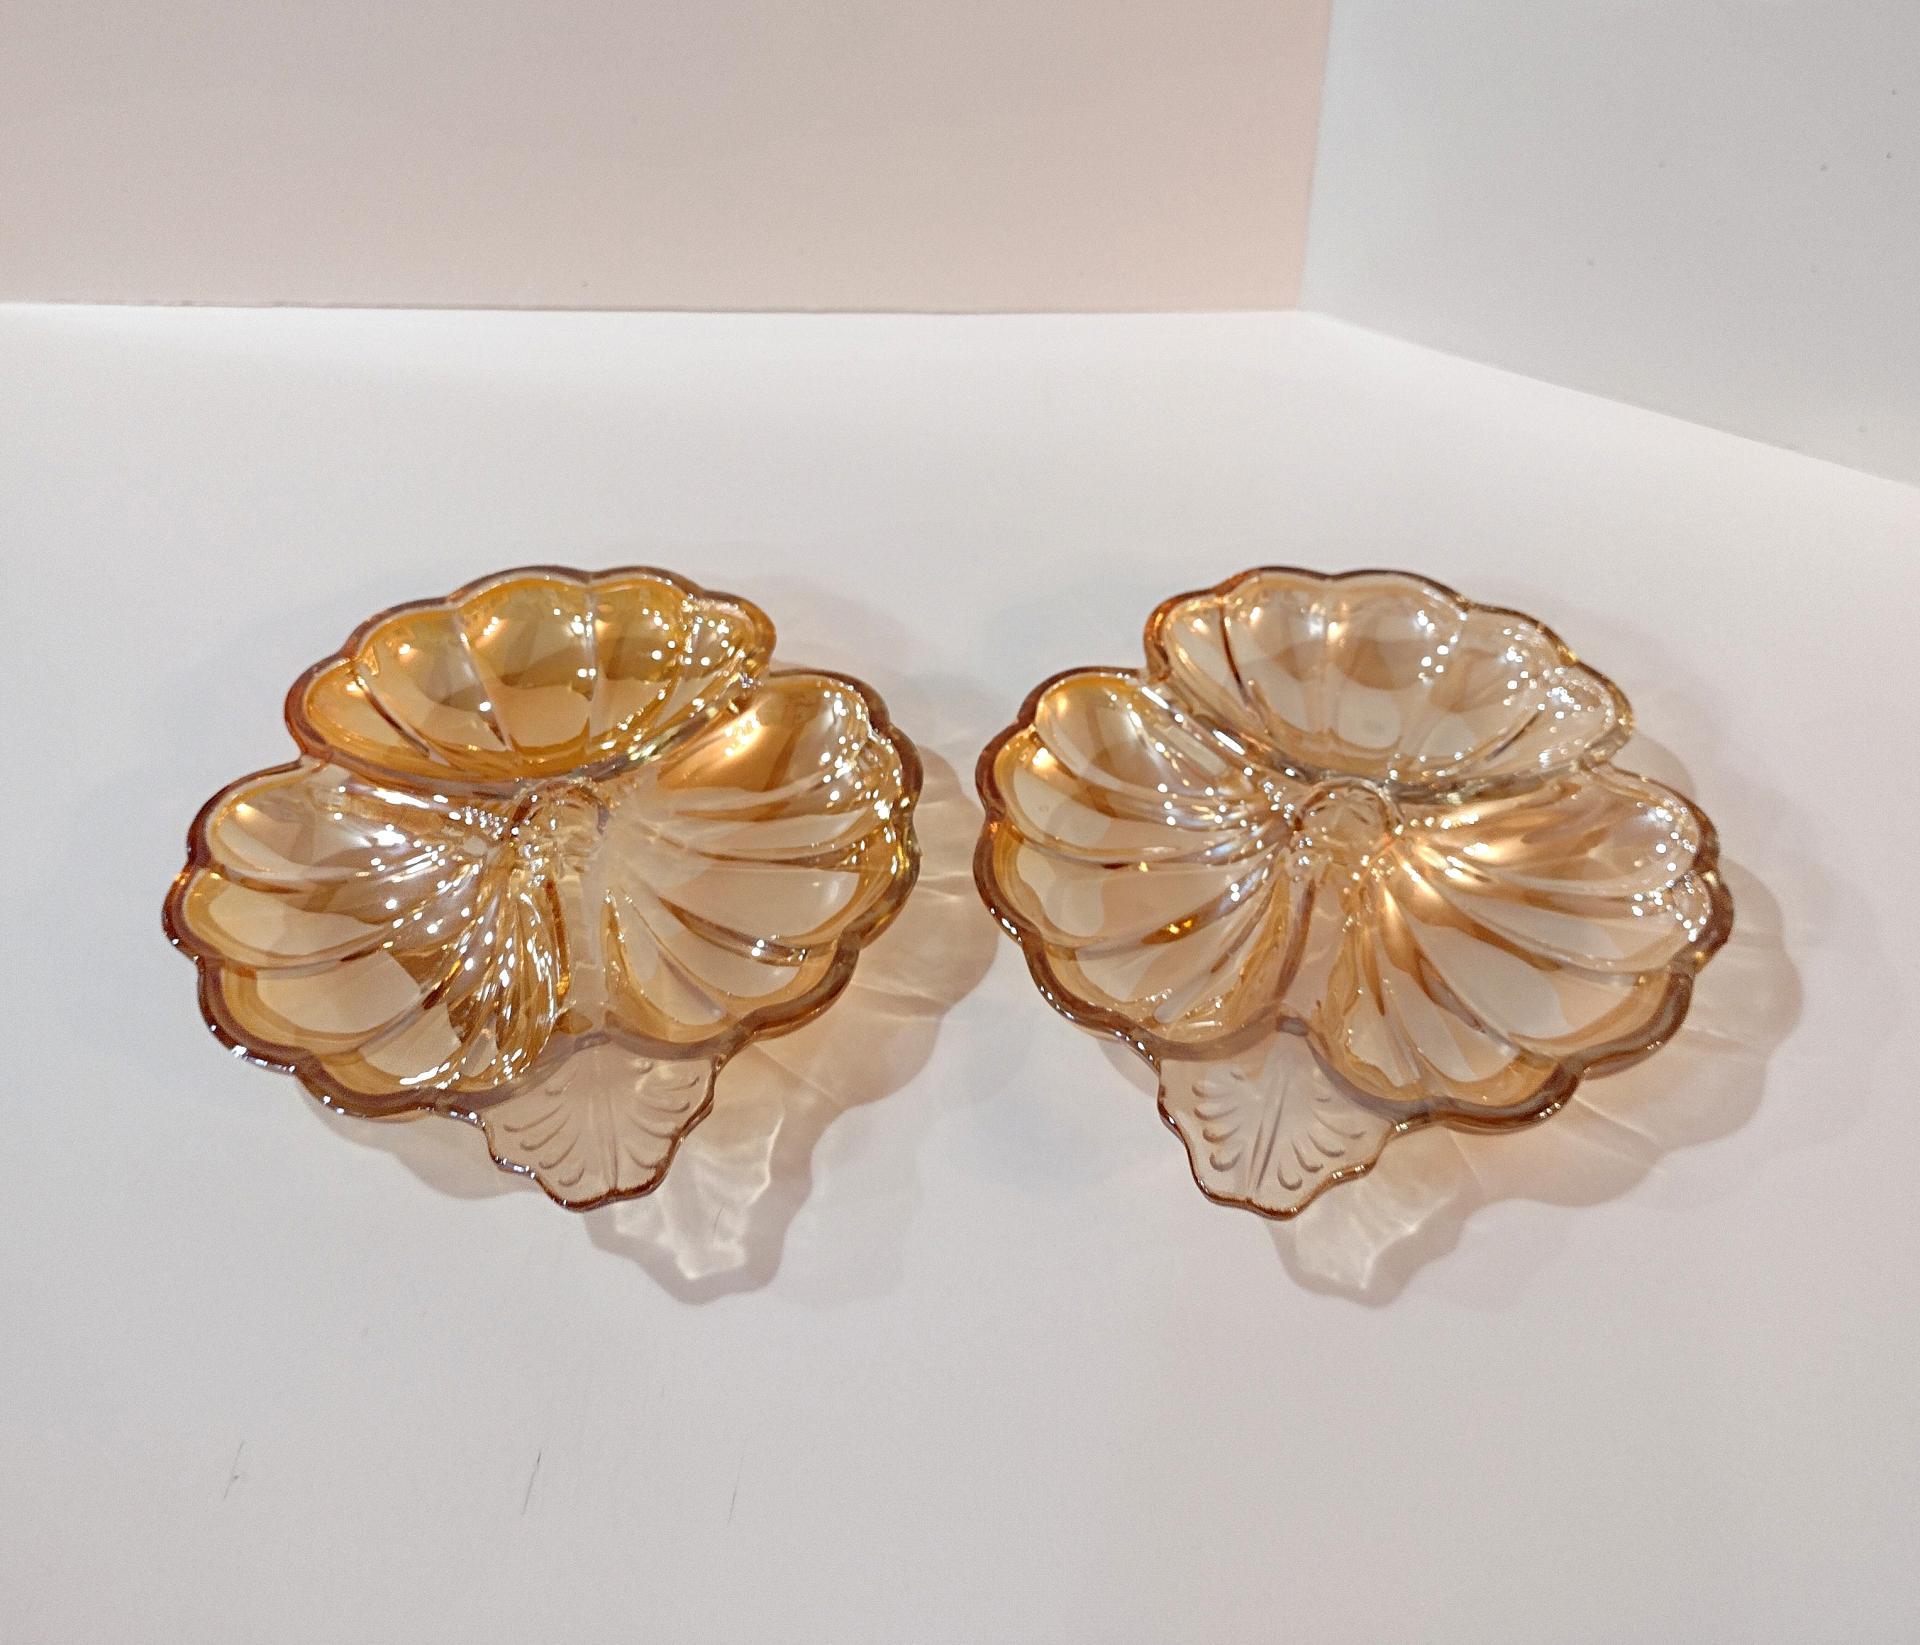 Vintage Jeanette Glass Marigold Doric Iridescent Clover Candy Nut Dishes, Set of Two, Vintage Carnival Glass